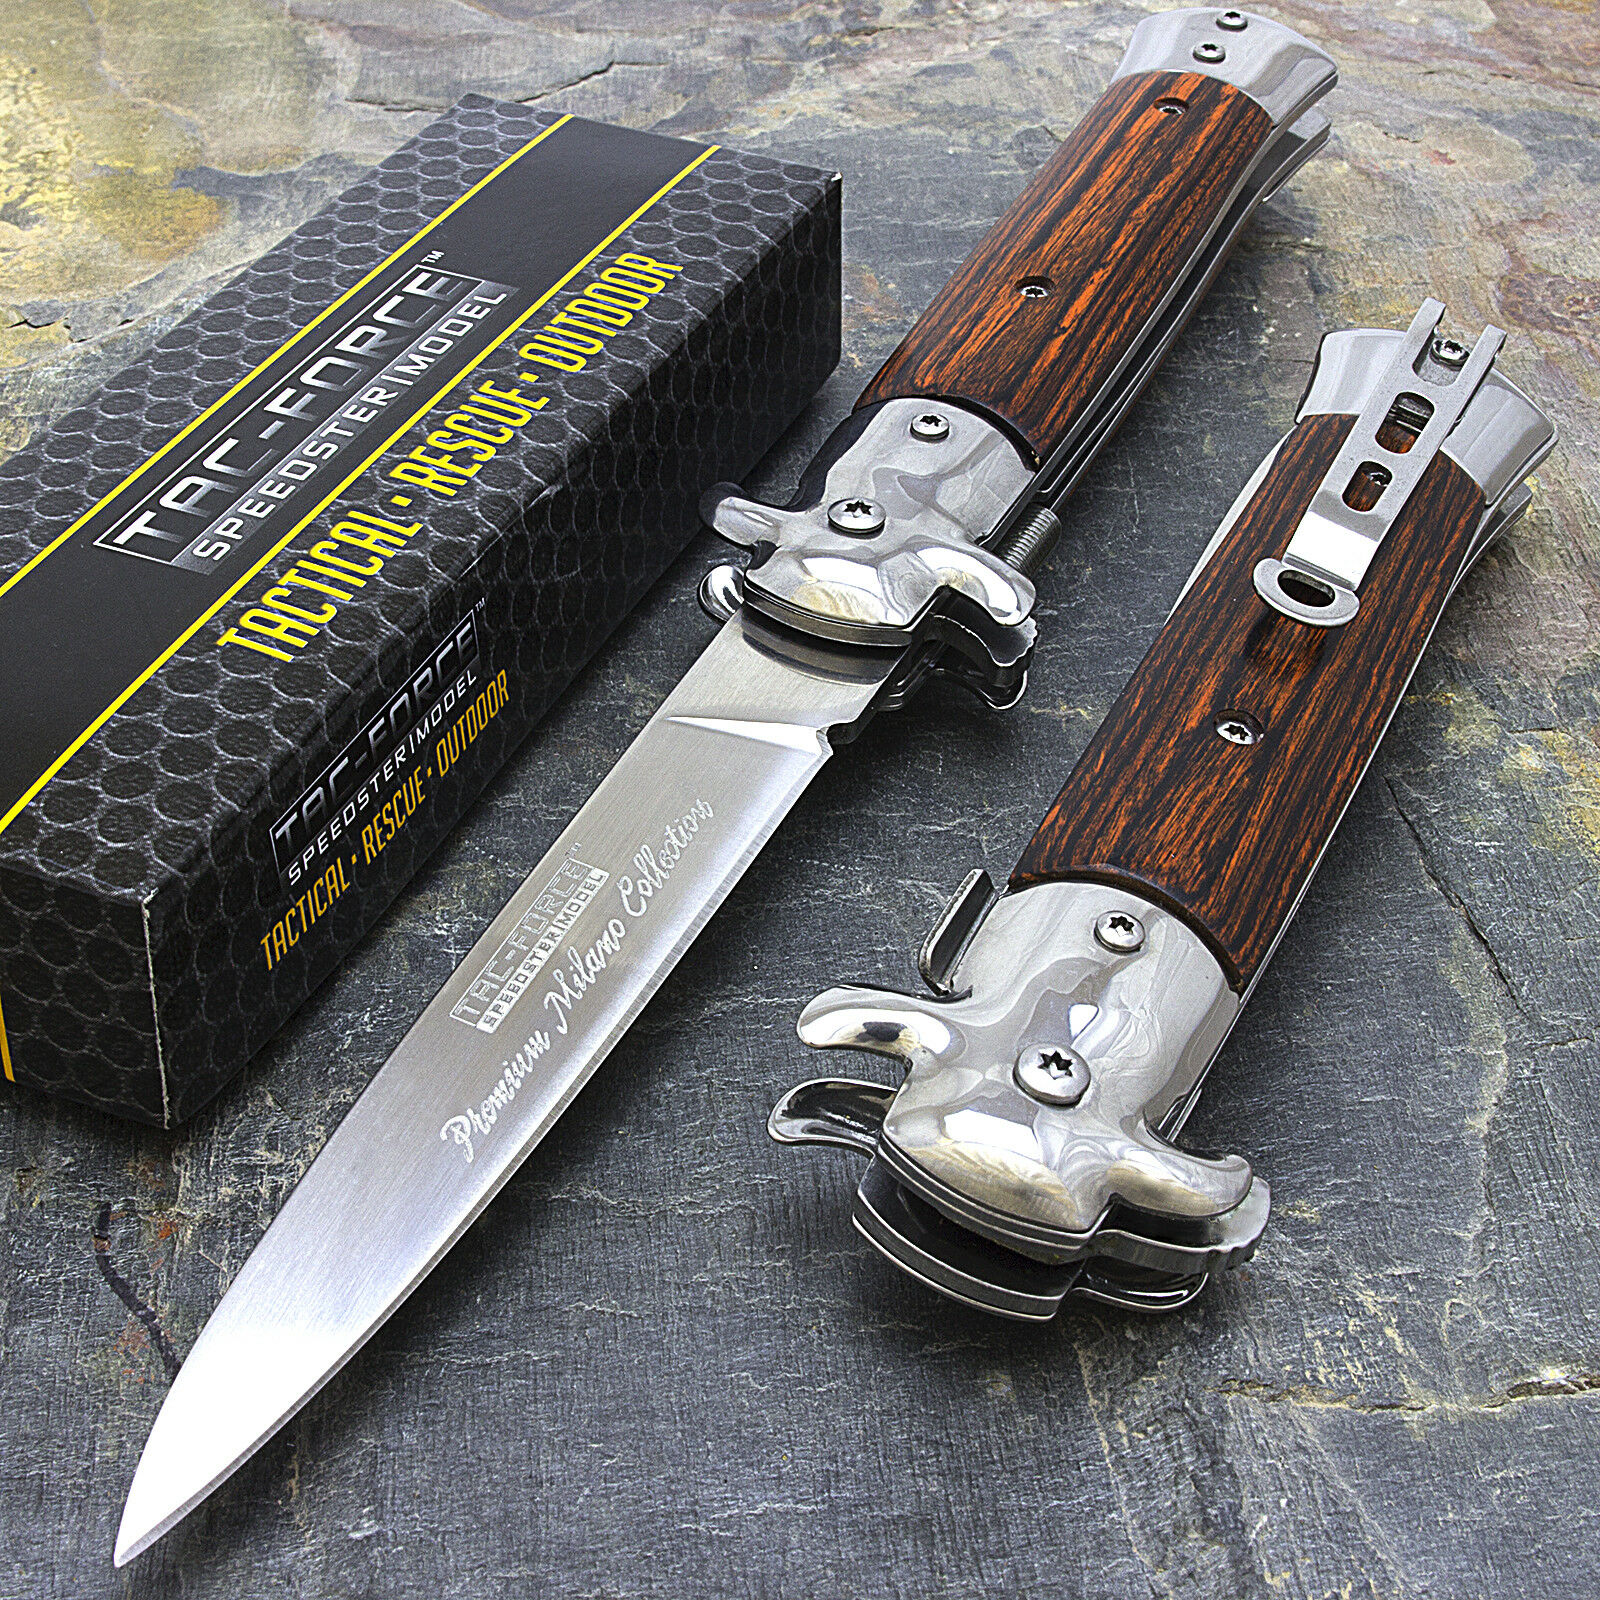 9" Stiletto Tac Force Milano Tactical Wood Spring Assisted Folding Knife Pocket